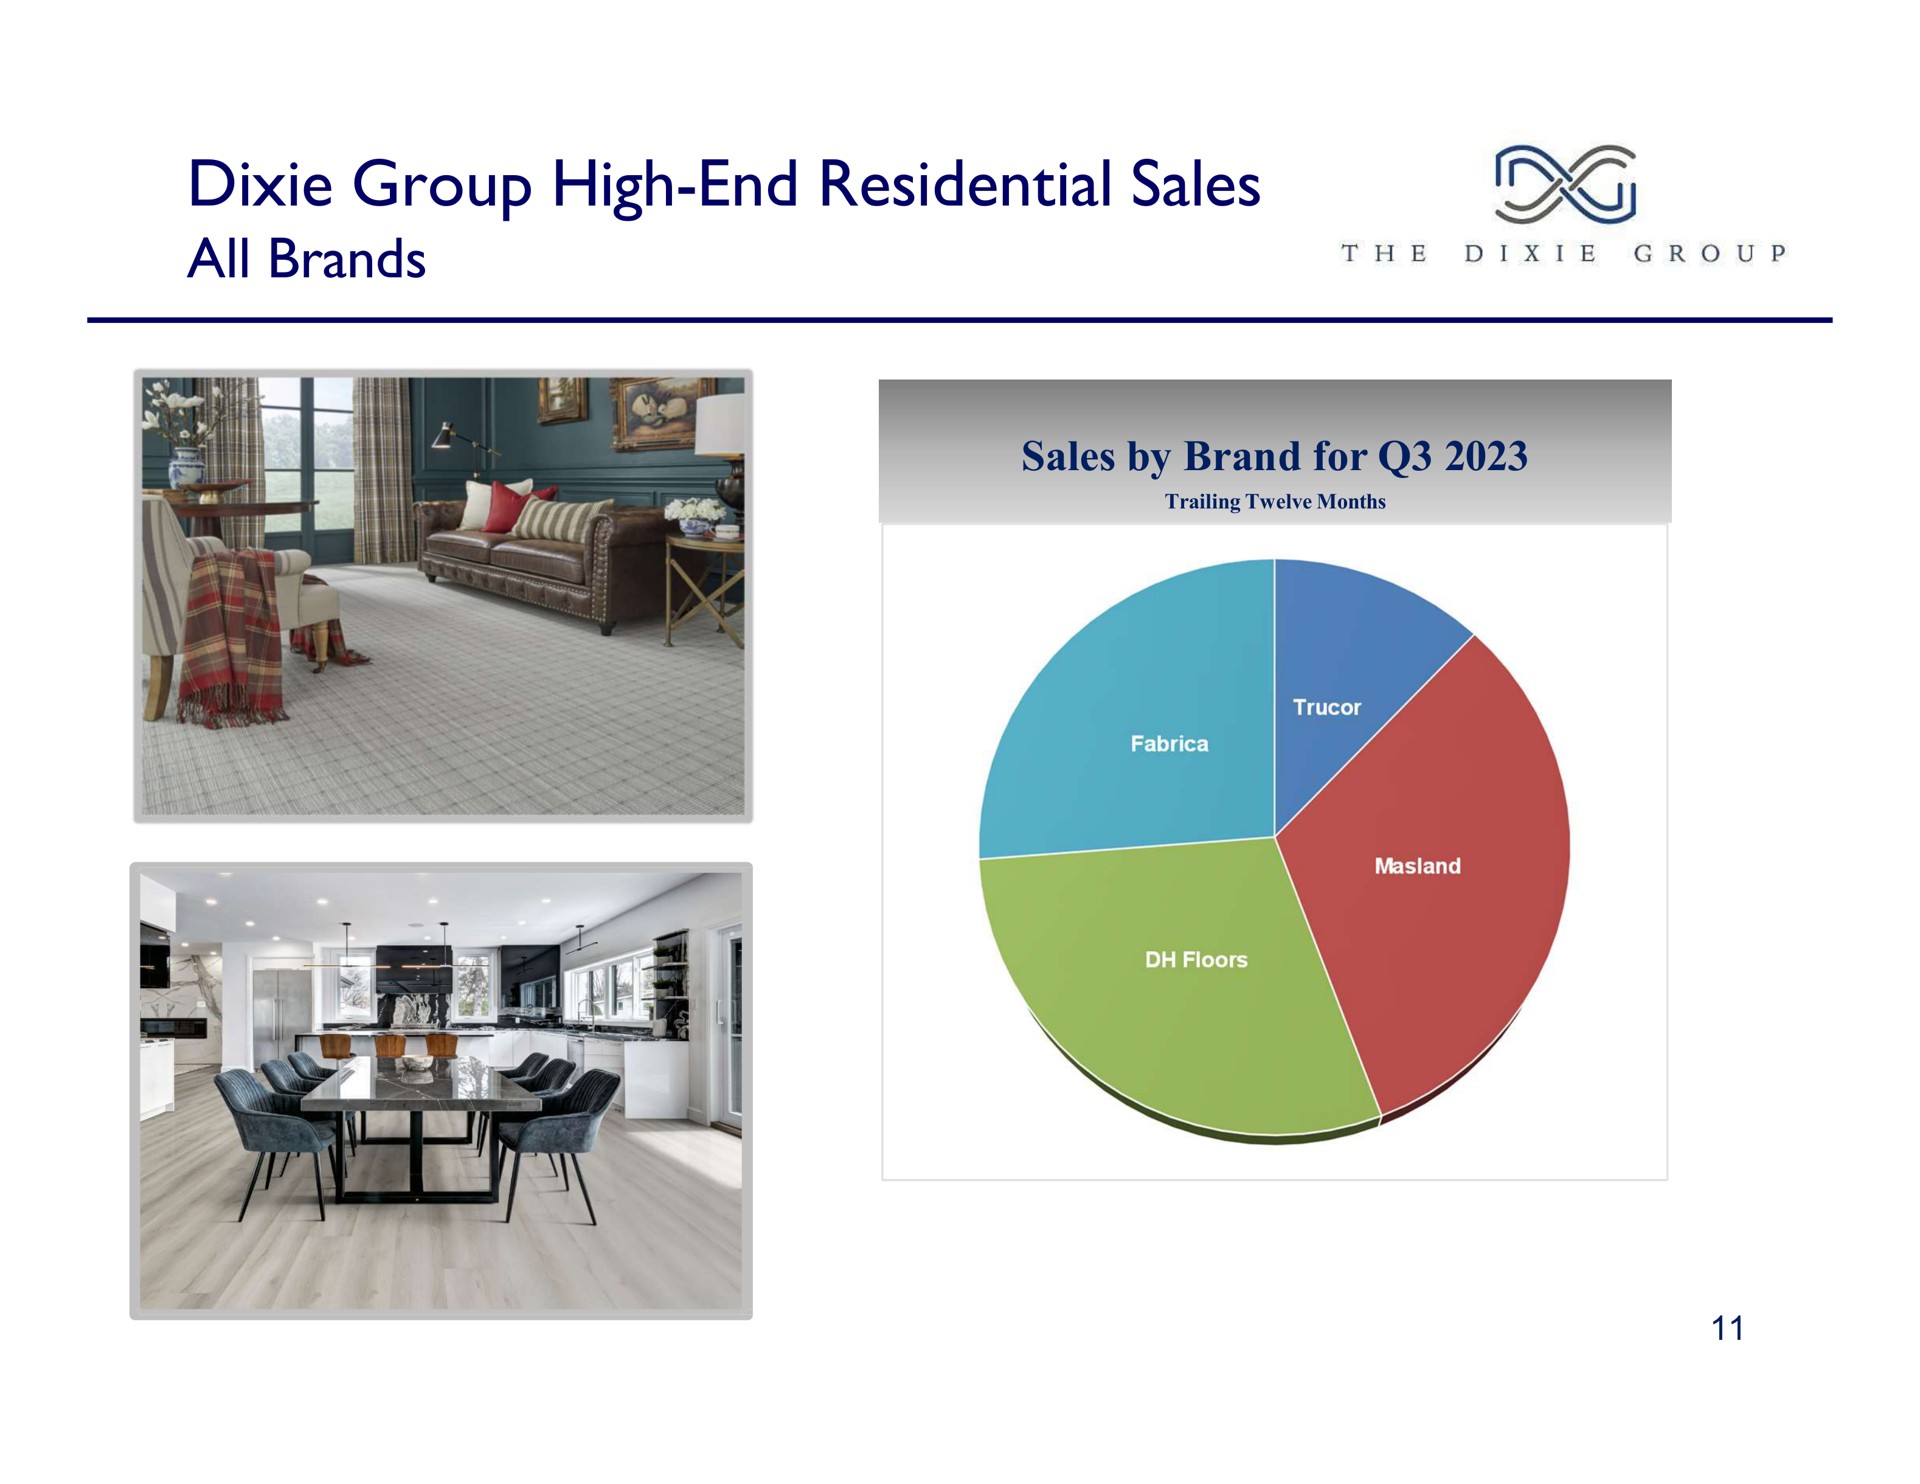 dixie group high end residential sales | The Dixie Group